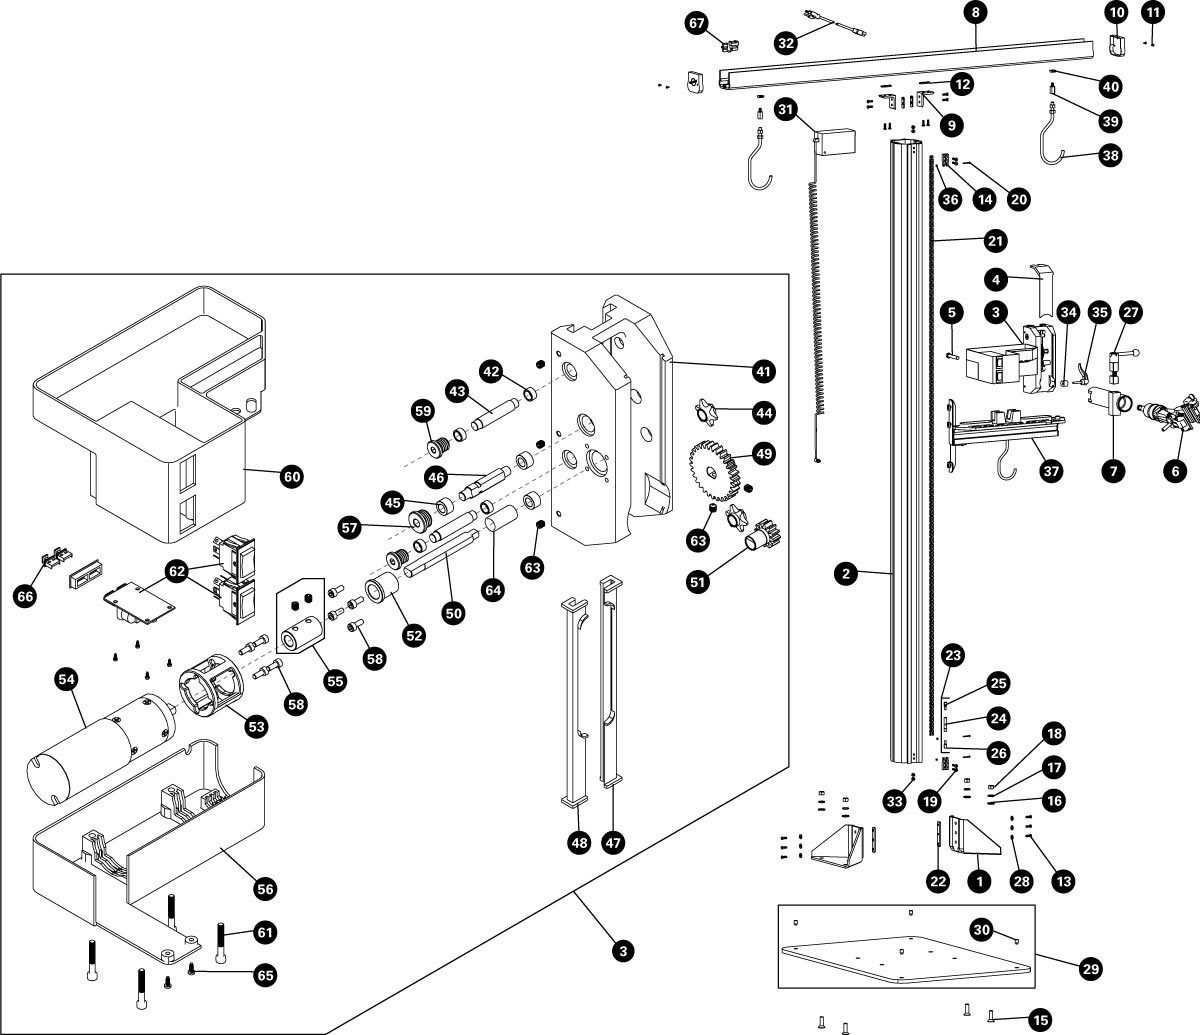 Parts diagram for PRS-33.2 Power Lift Shop Stand, click to enlarge